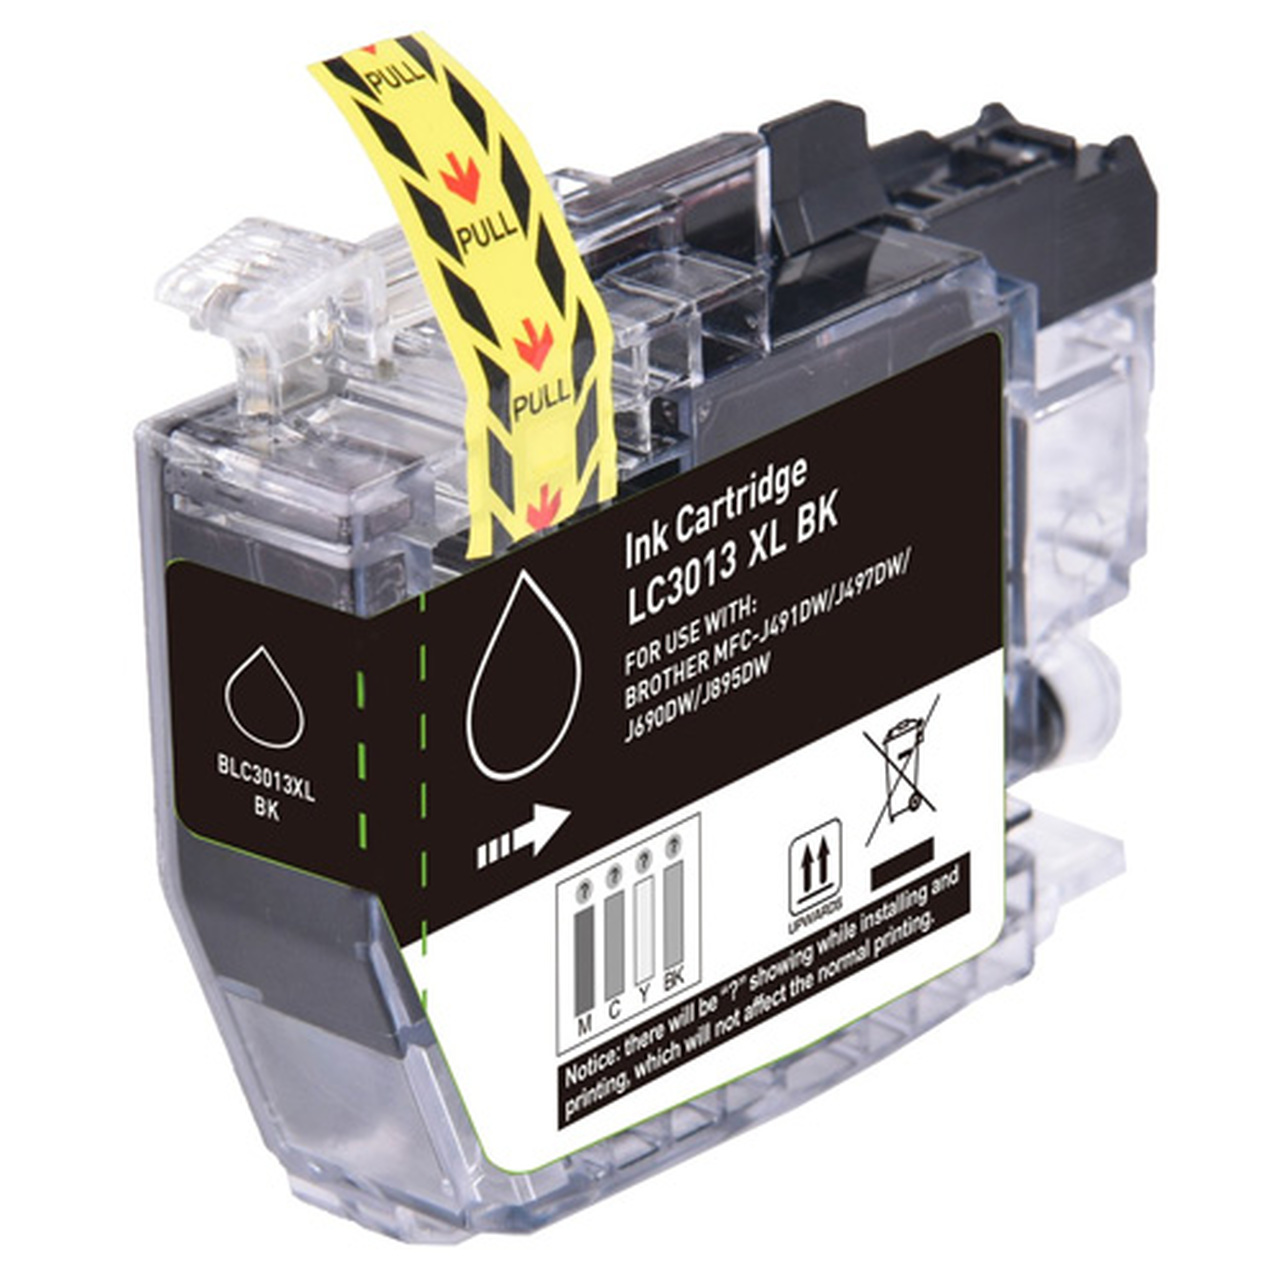 .Brother LC-3013BK Black Compatible Ink Cartridge (400 page yield)